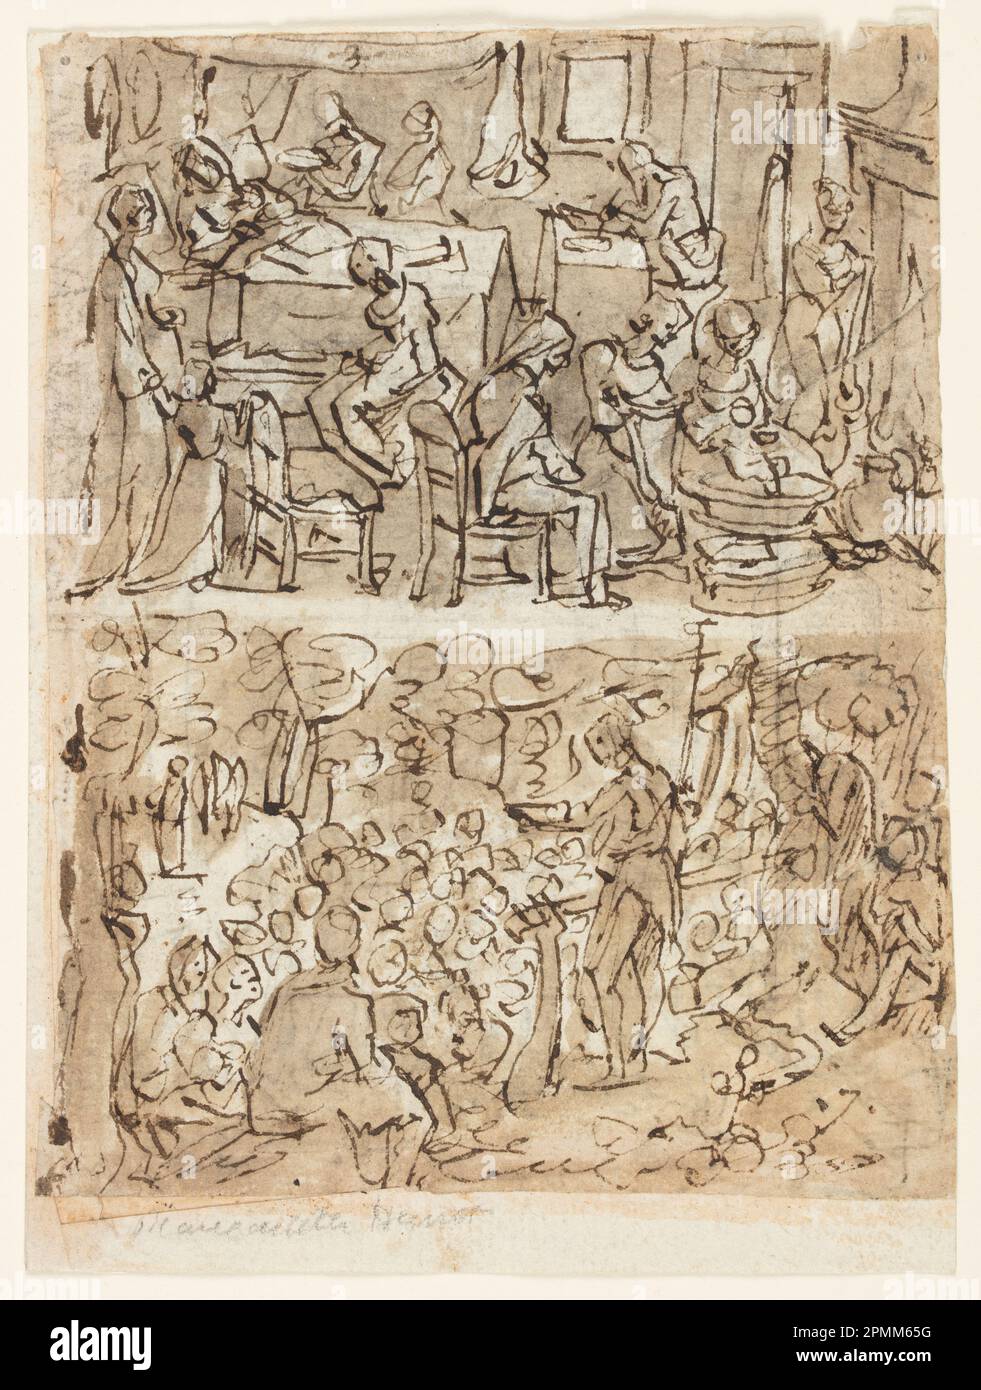 Drawing, The Birth of John [above]; John Preaching in the Wilderness [below]; Jan van der Straet, called Stradanus (Flemish, 1523–1605); Engraved by Hans Collaert II (Flemish, 1560 - 1628); Published by Theodor Galle; Italy; pen and ink, brush and wash over black chalk on paper; 14.3 x 11.2 cm (5 5/8 x 4 7/16 in.) Stock Photo